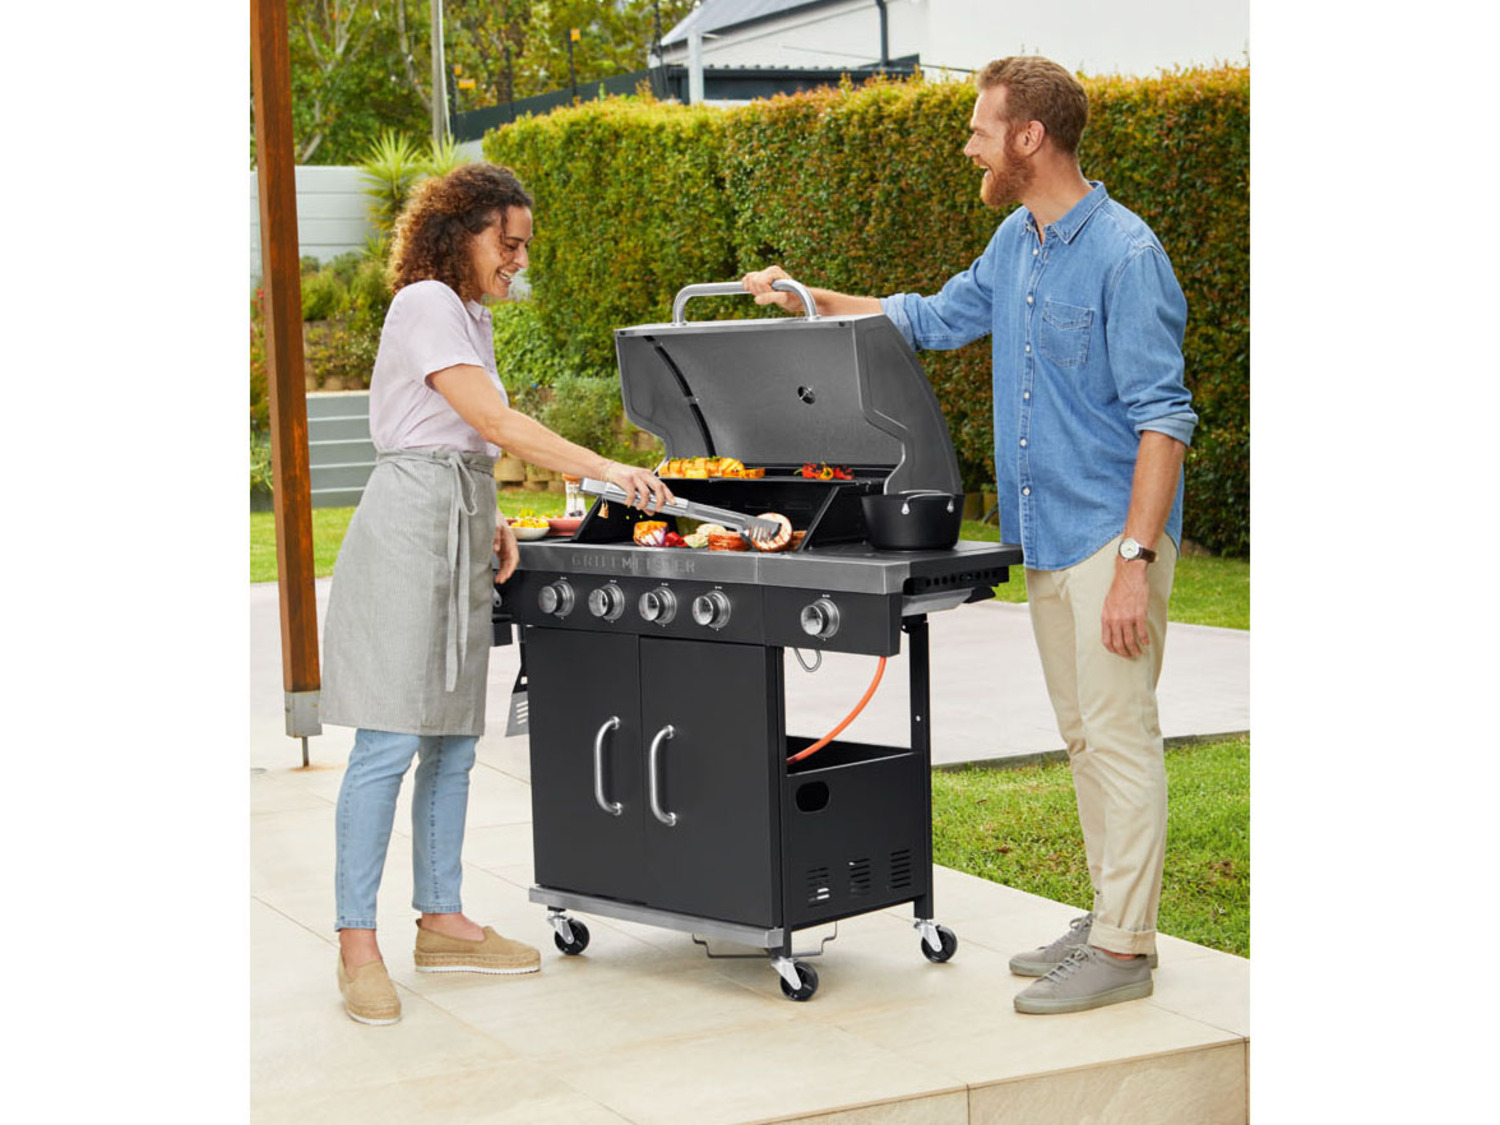 GRILLMEISTER Gasgrill, 4plus1 Brenner, 19,7 LIDL kW 